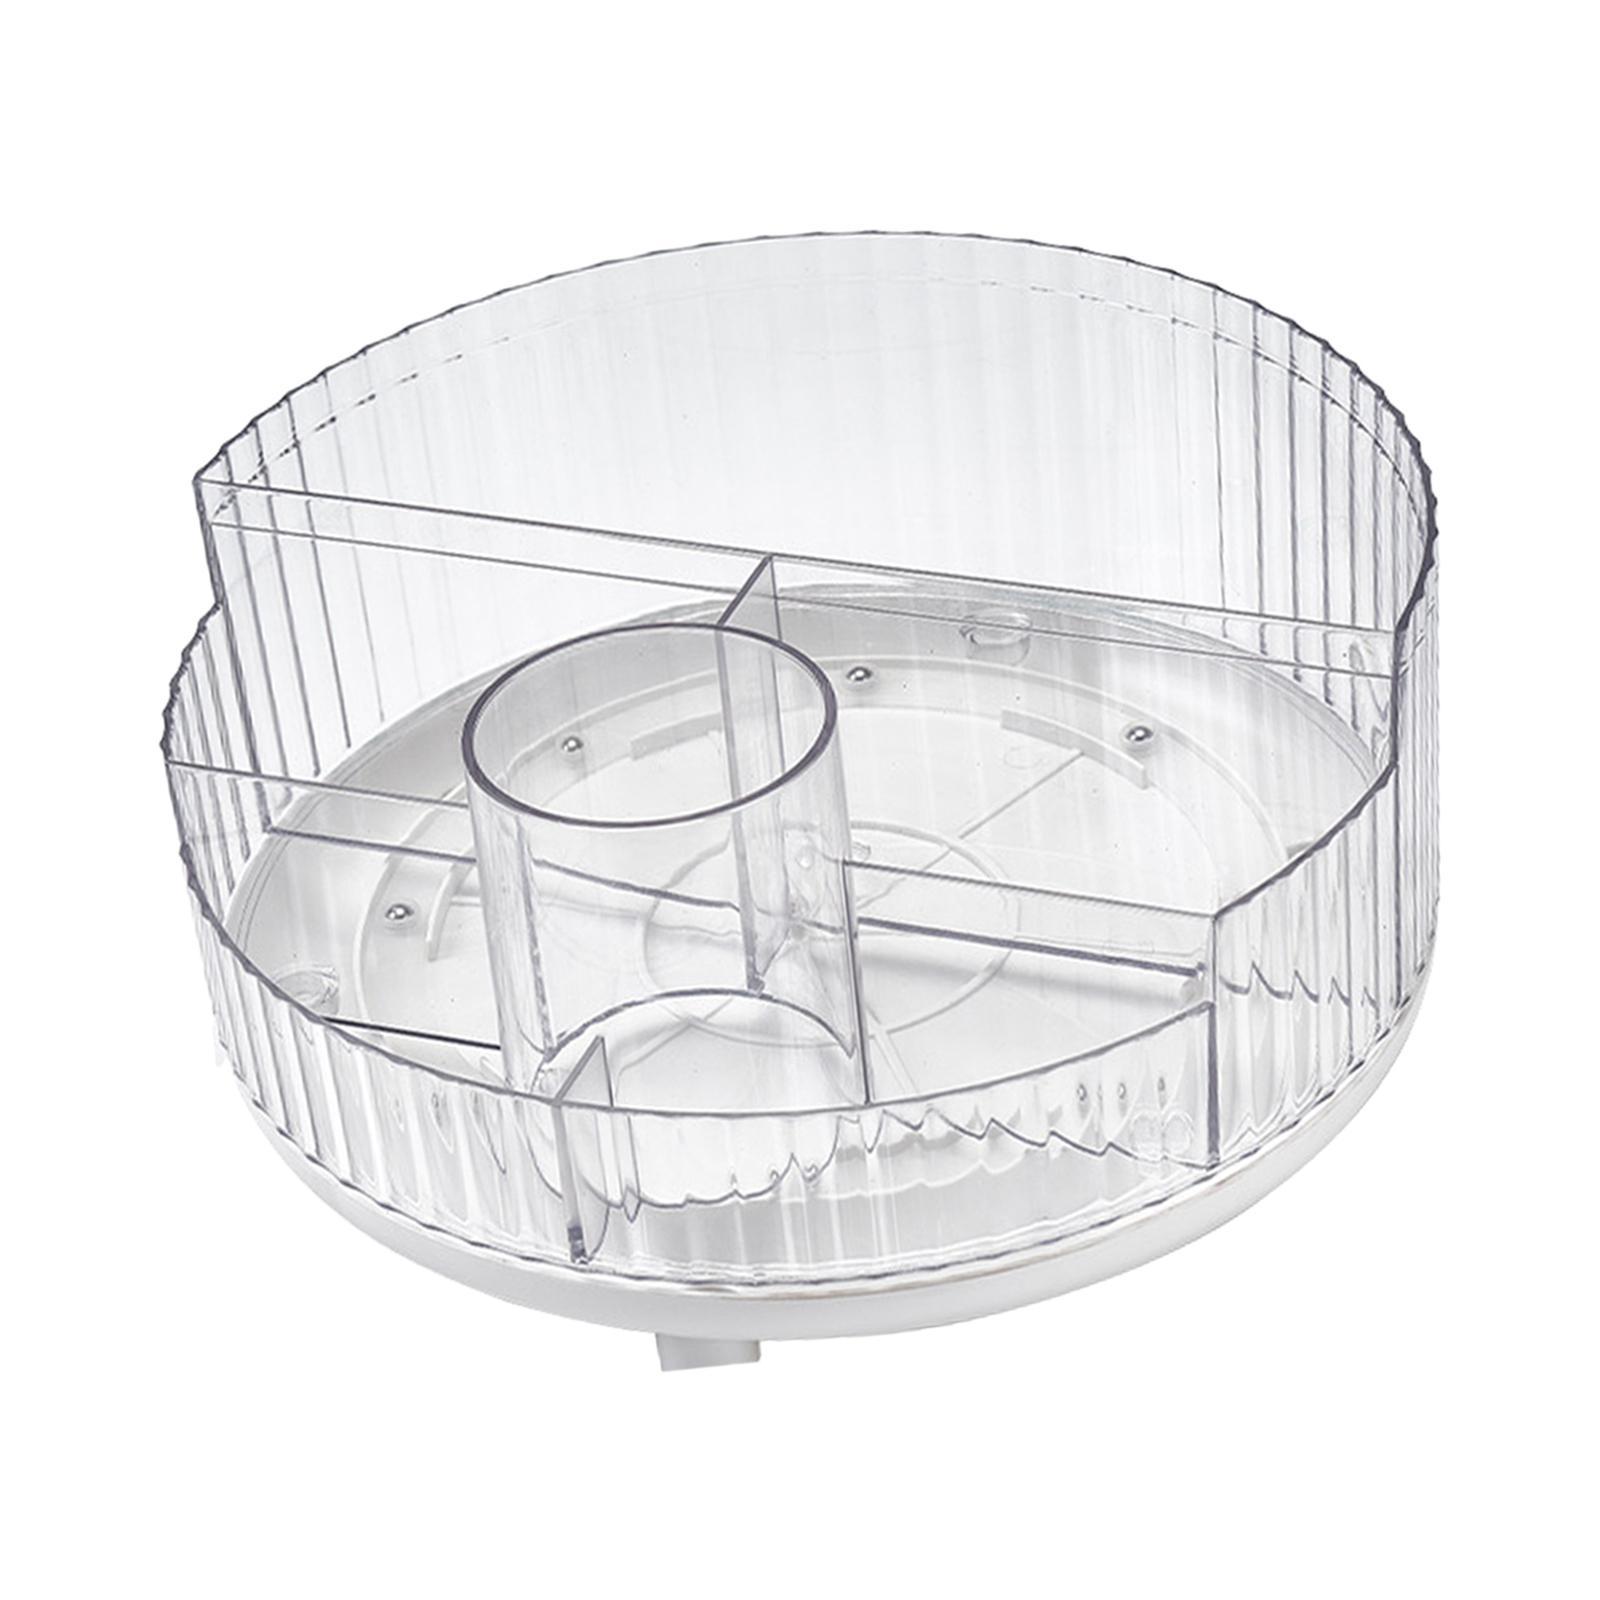 Cosmetic Makeup Rack Organizer Container Tabletop for Bathroom Dresser